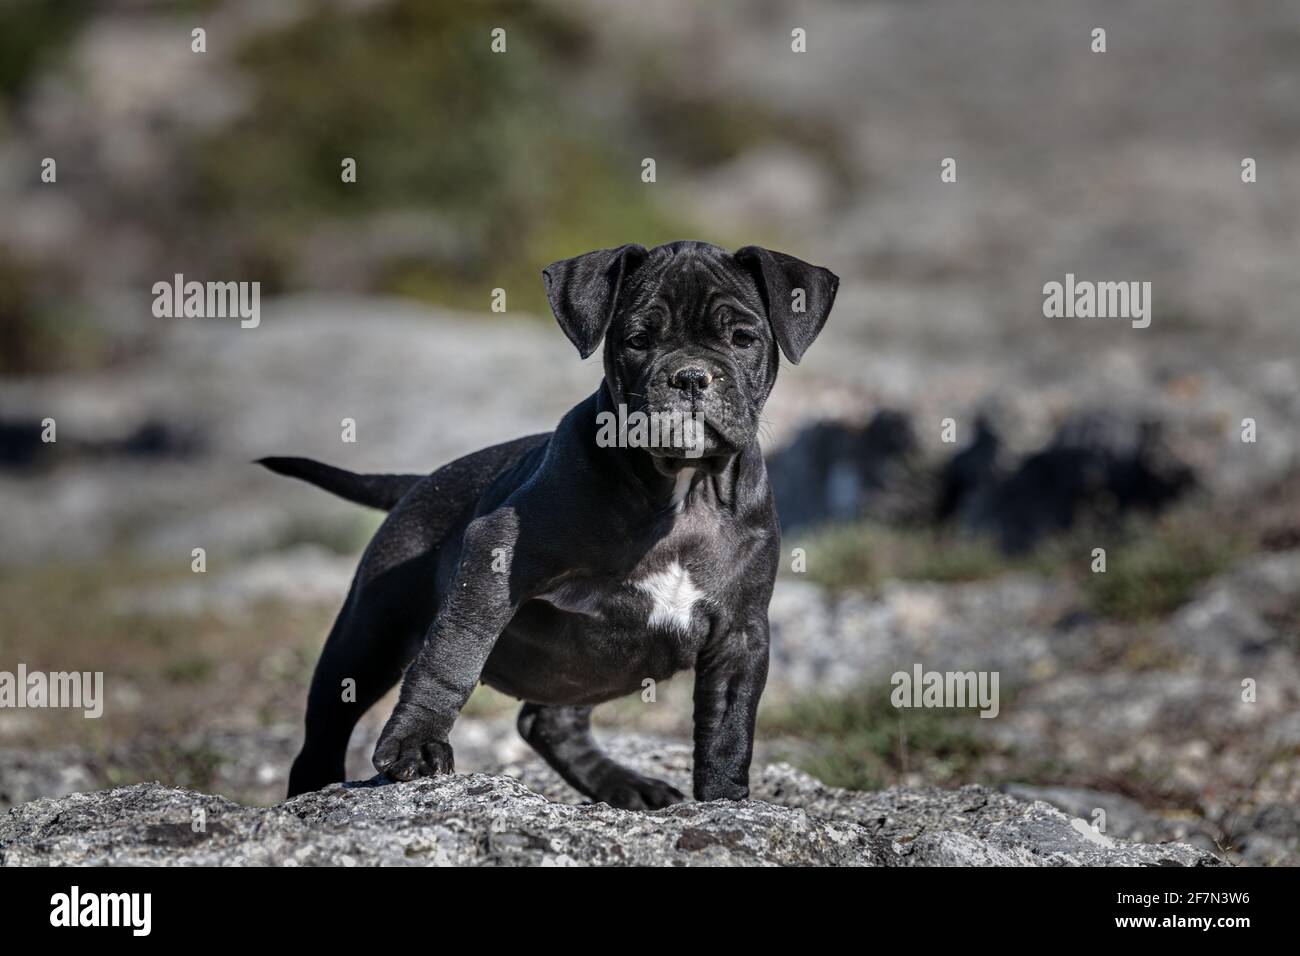 black and white spotted pitbull puppy